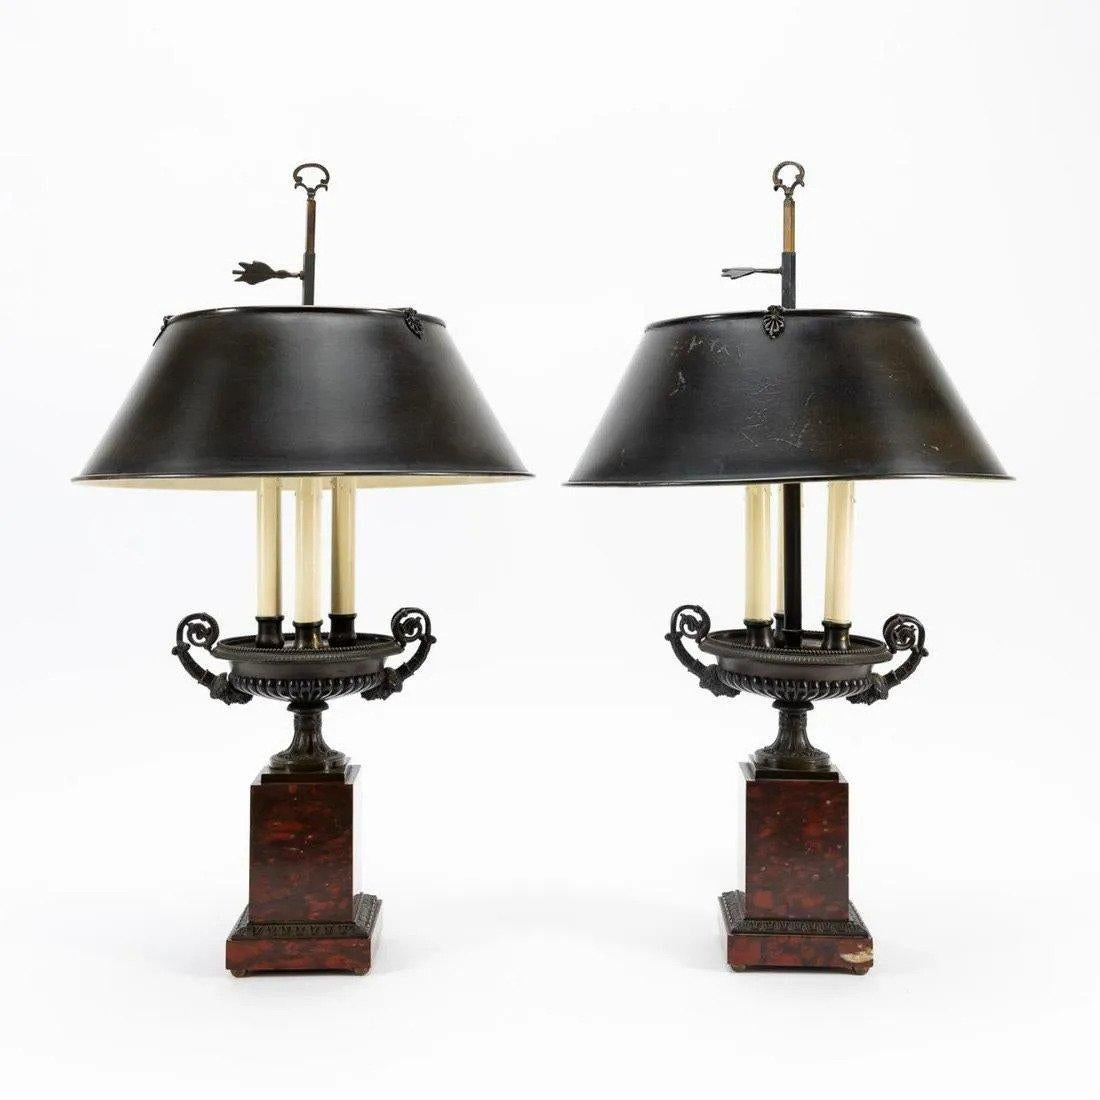 French, 19th century with later fittings, pair of Charles X Grand Tour bronze urn-form tazze, now mounted as three-light lamps with tole shades, each having figural mask decorated arms, gadrooned urn and red griotte marble base with rais-de-coeur